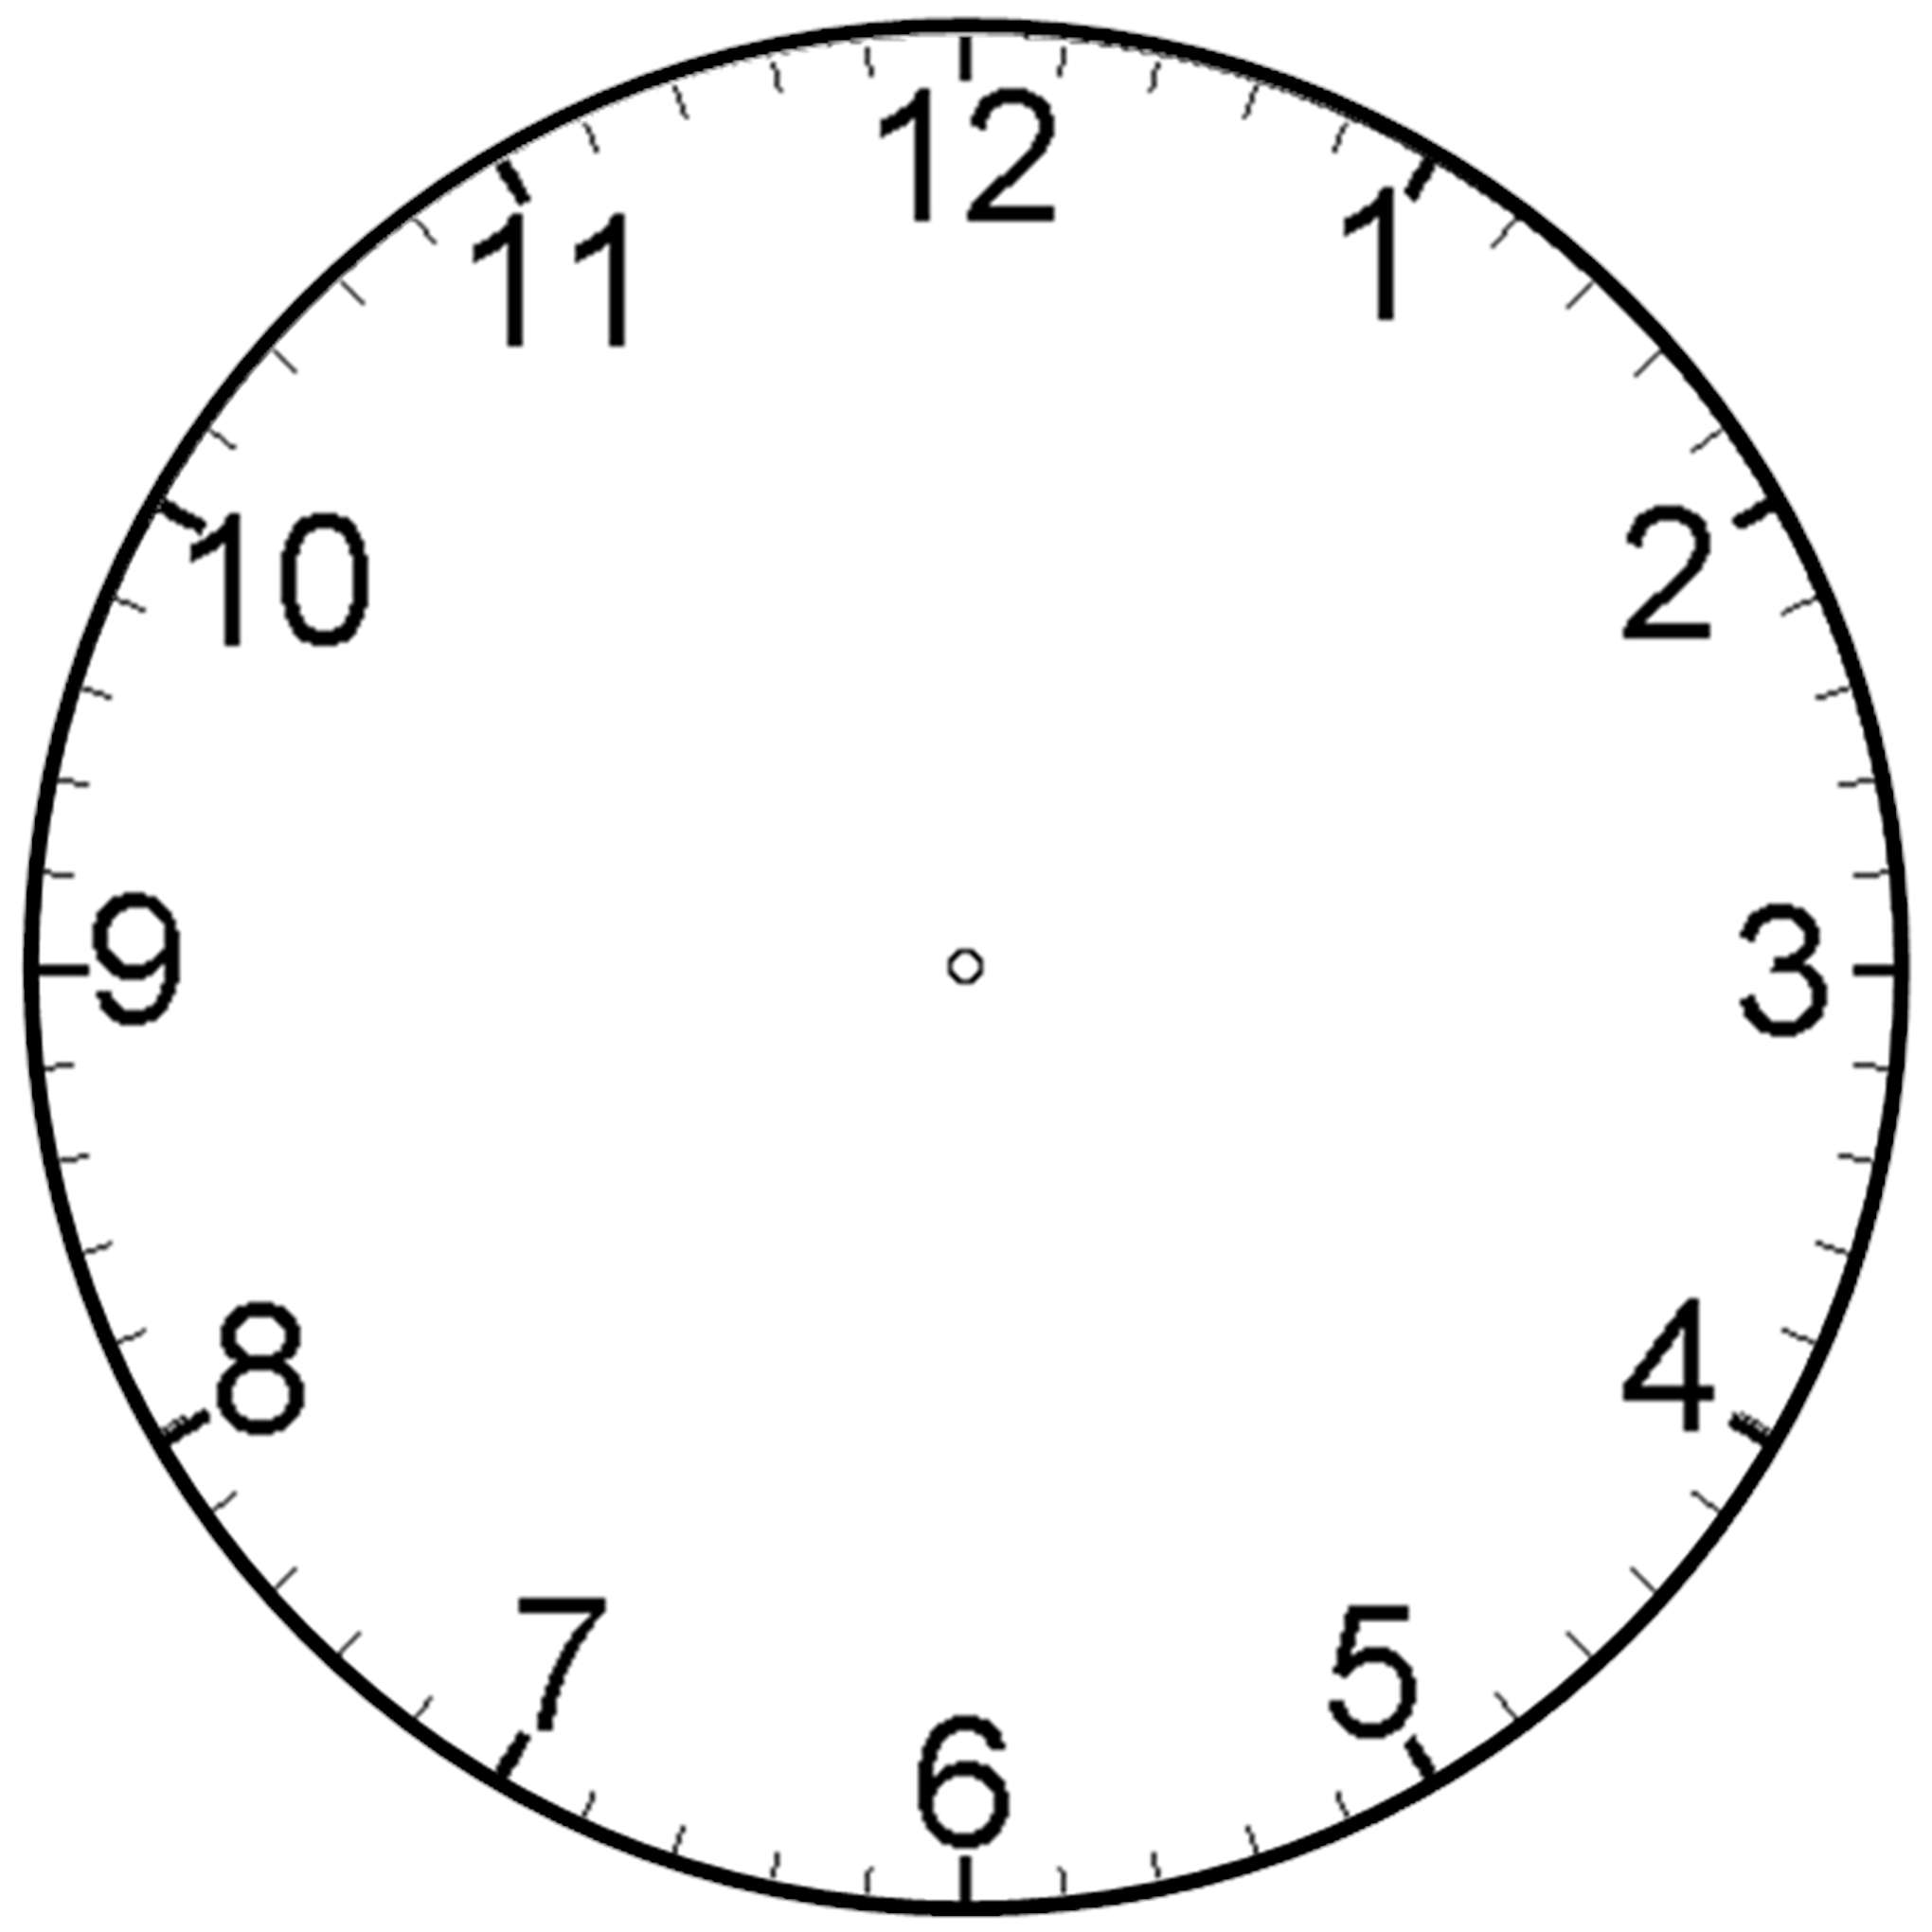 Analog Clock Without Hands - ClipArt Best